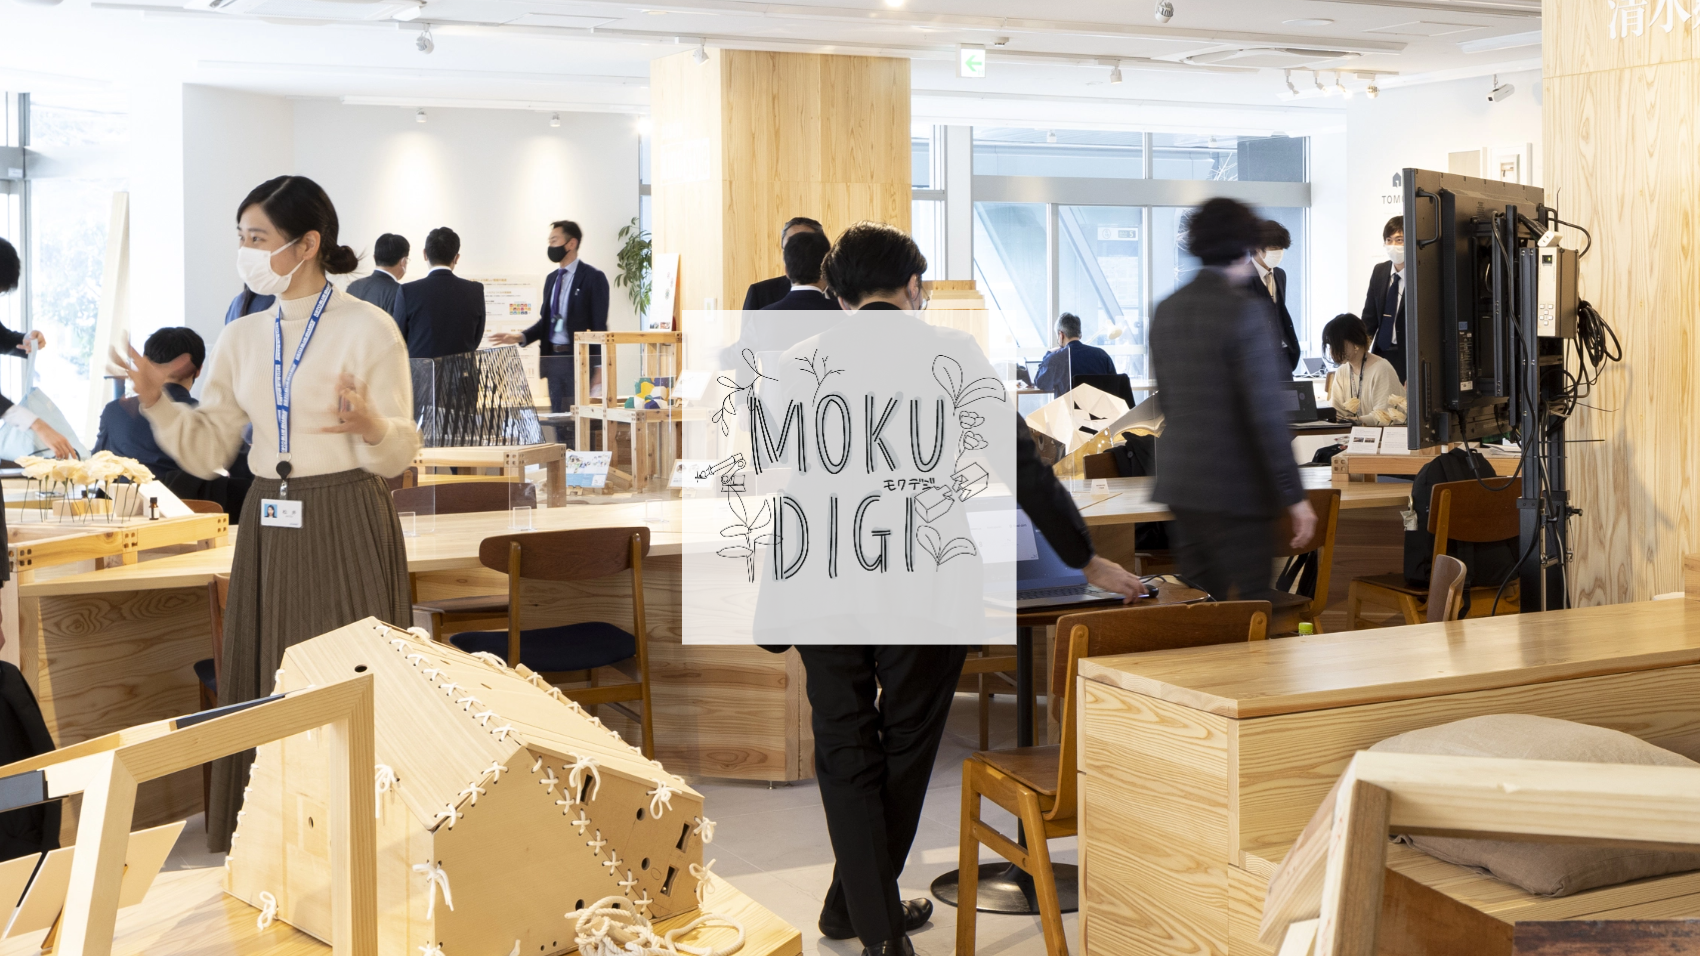 Special site added on topic of pursuing the future of construction with MOKU DIGI (Wood + Digital) Block Exhibition.